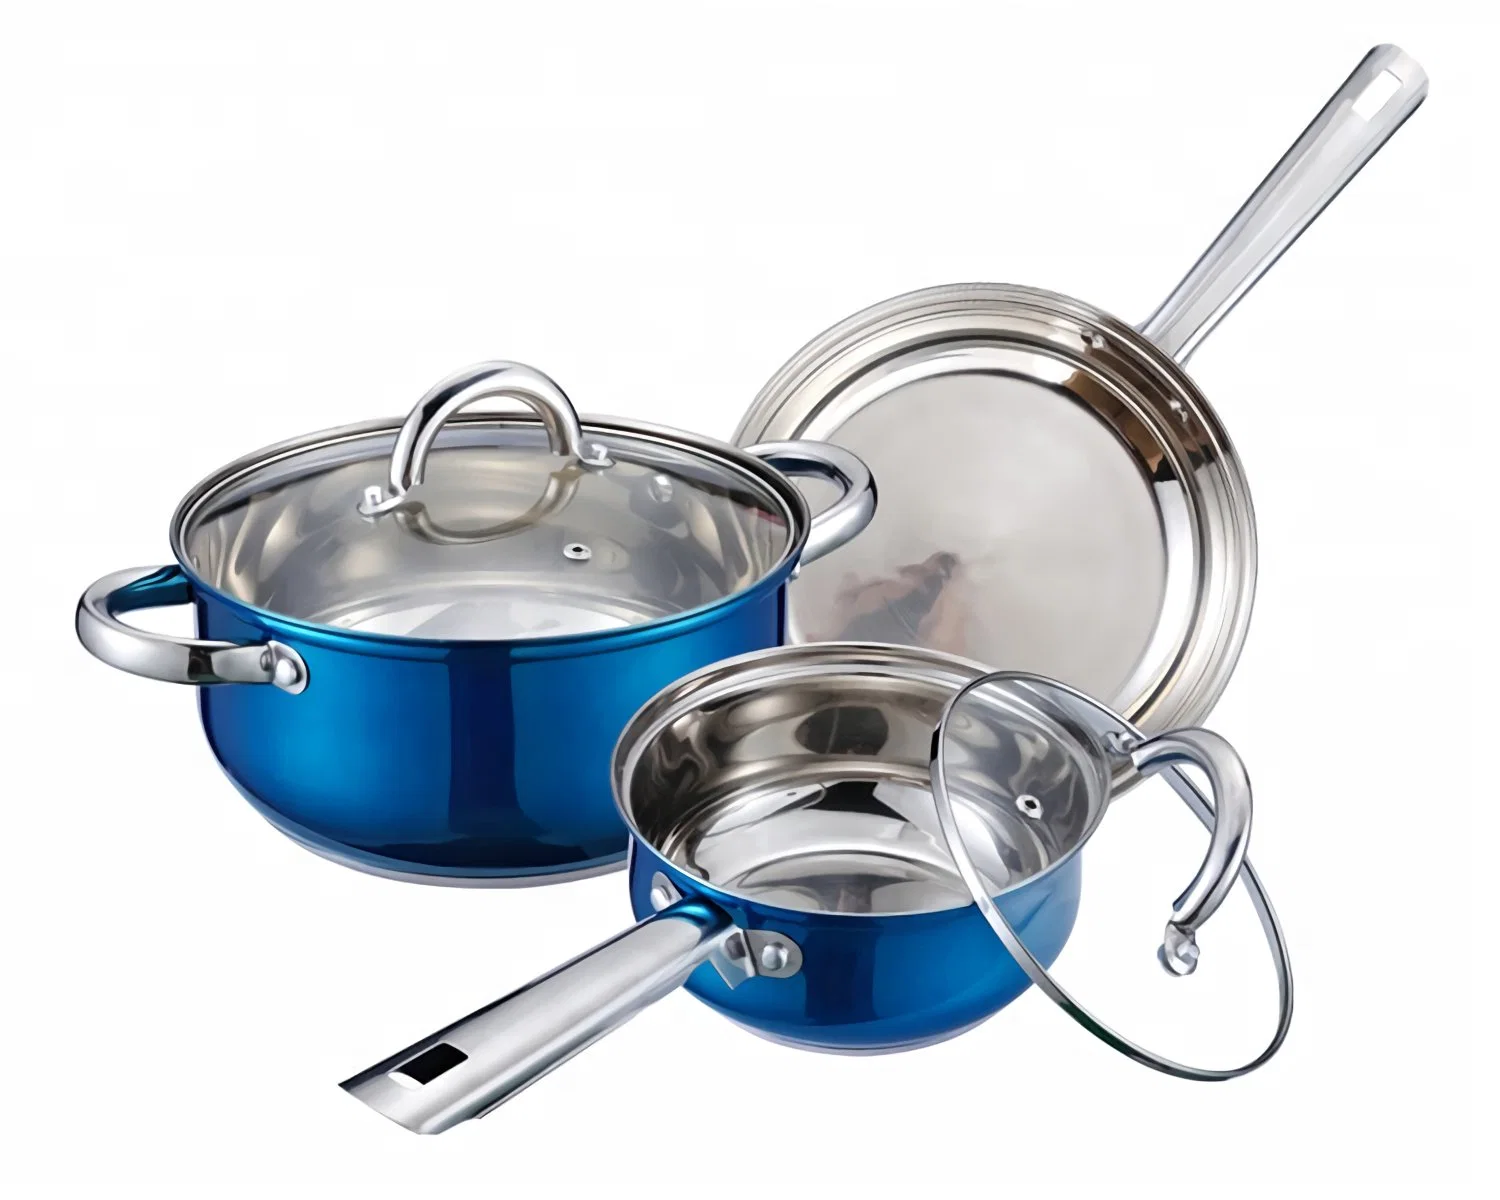 Factory Price Pots and Pans Set 5-Piece, Stainless Steel Induction Cookware with Customized Color Coating and Non Stick Ready All Stovetops Compatible